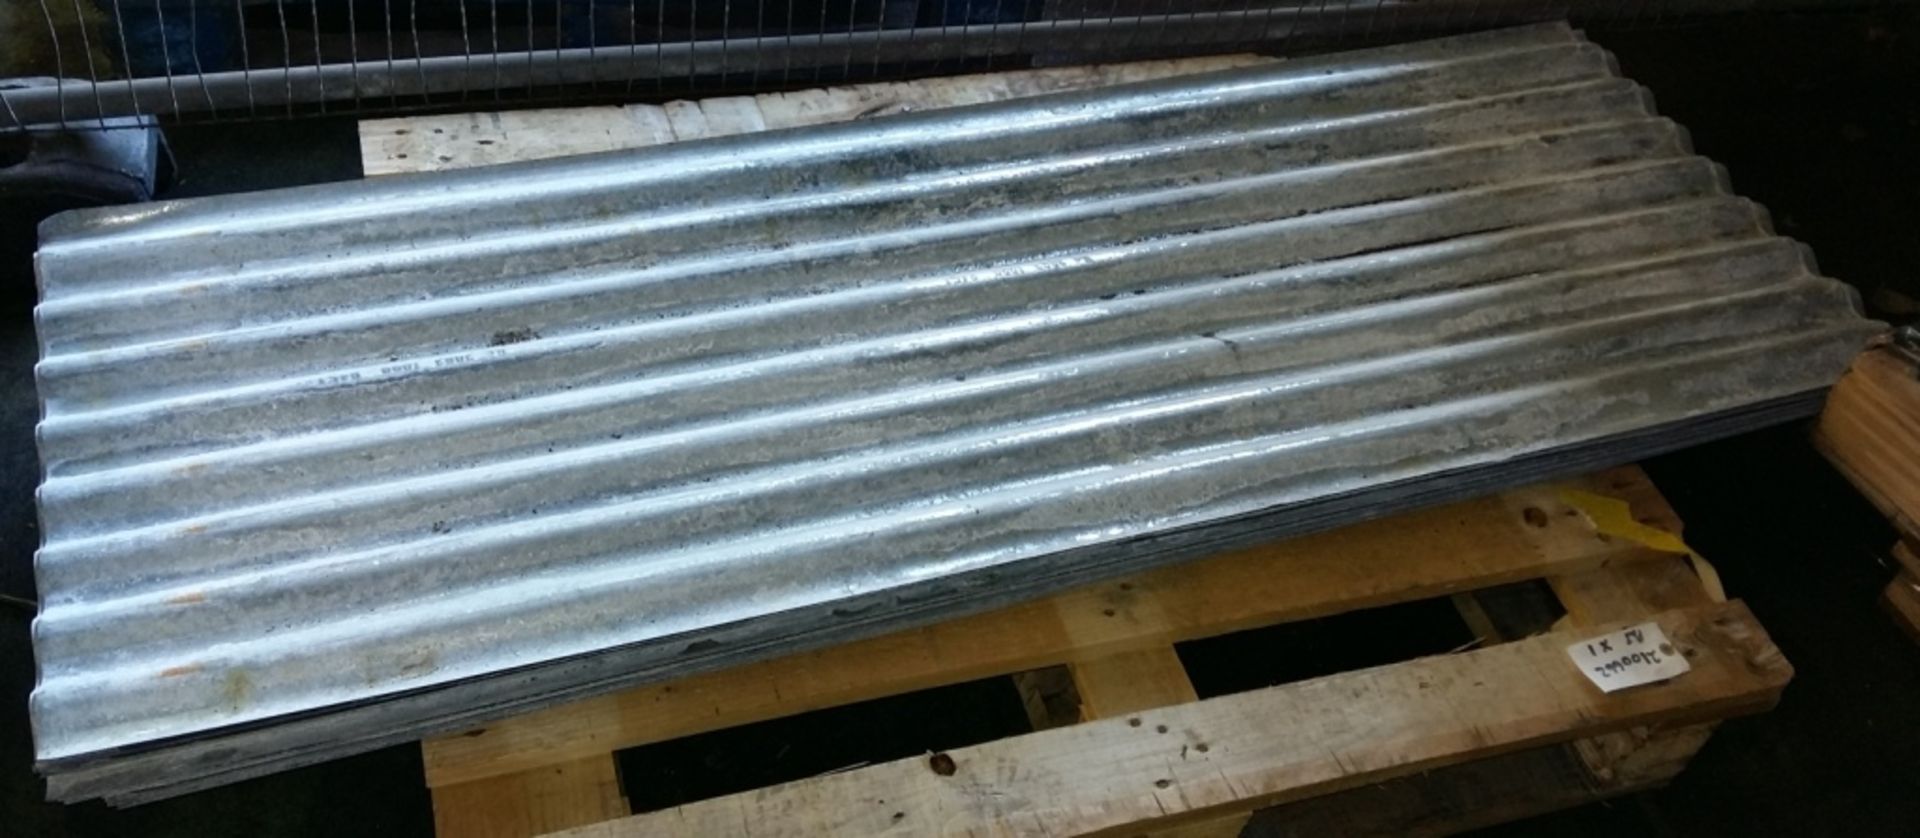 Corrugated galvanised sheets - approx 20 sheets